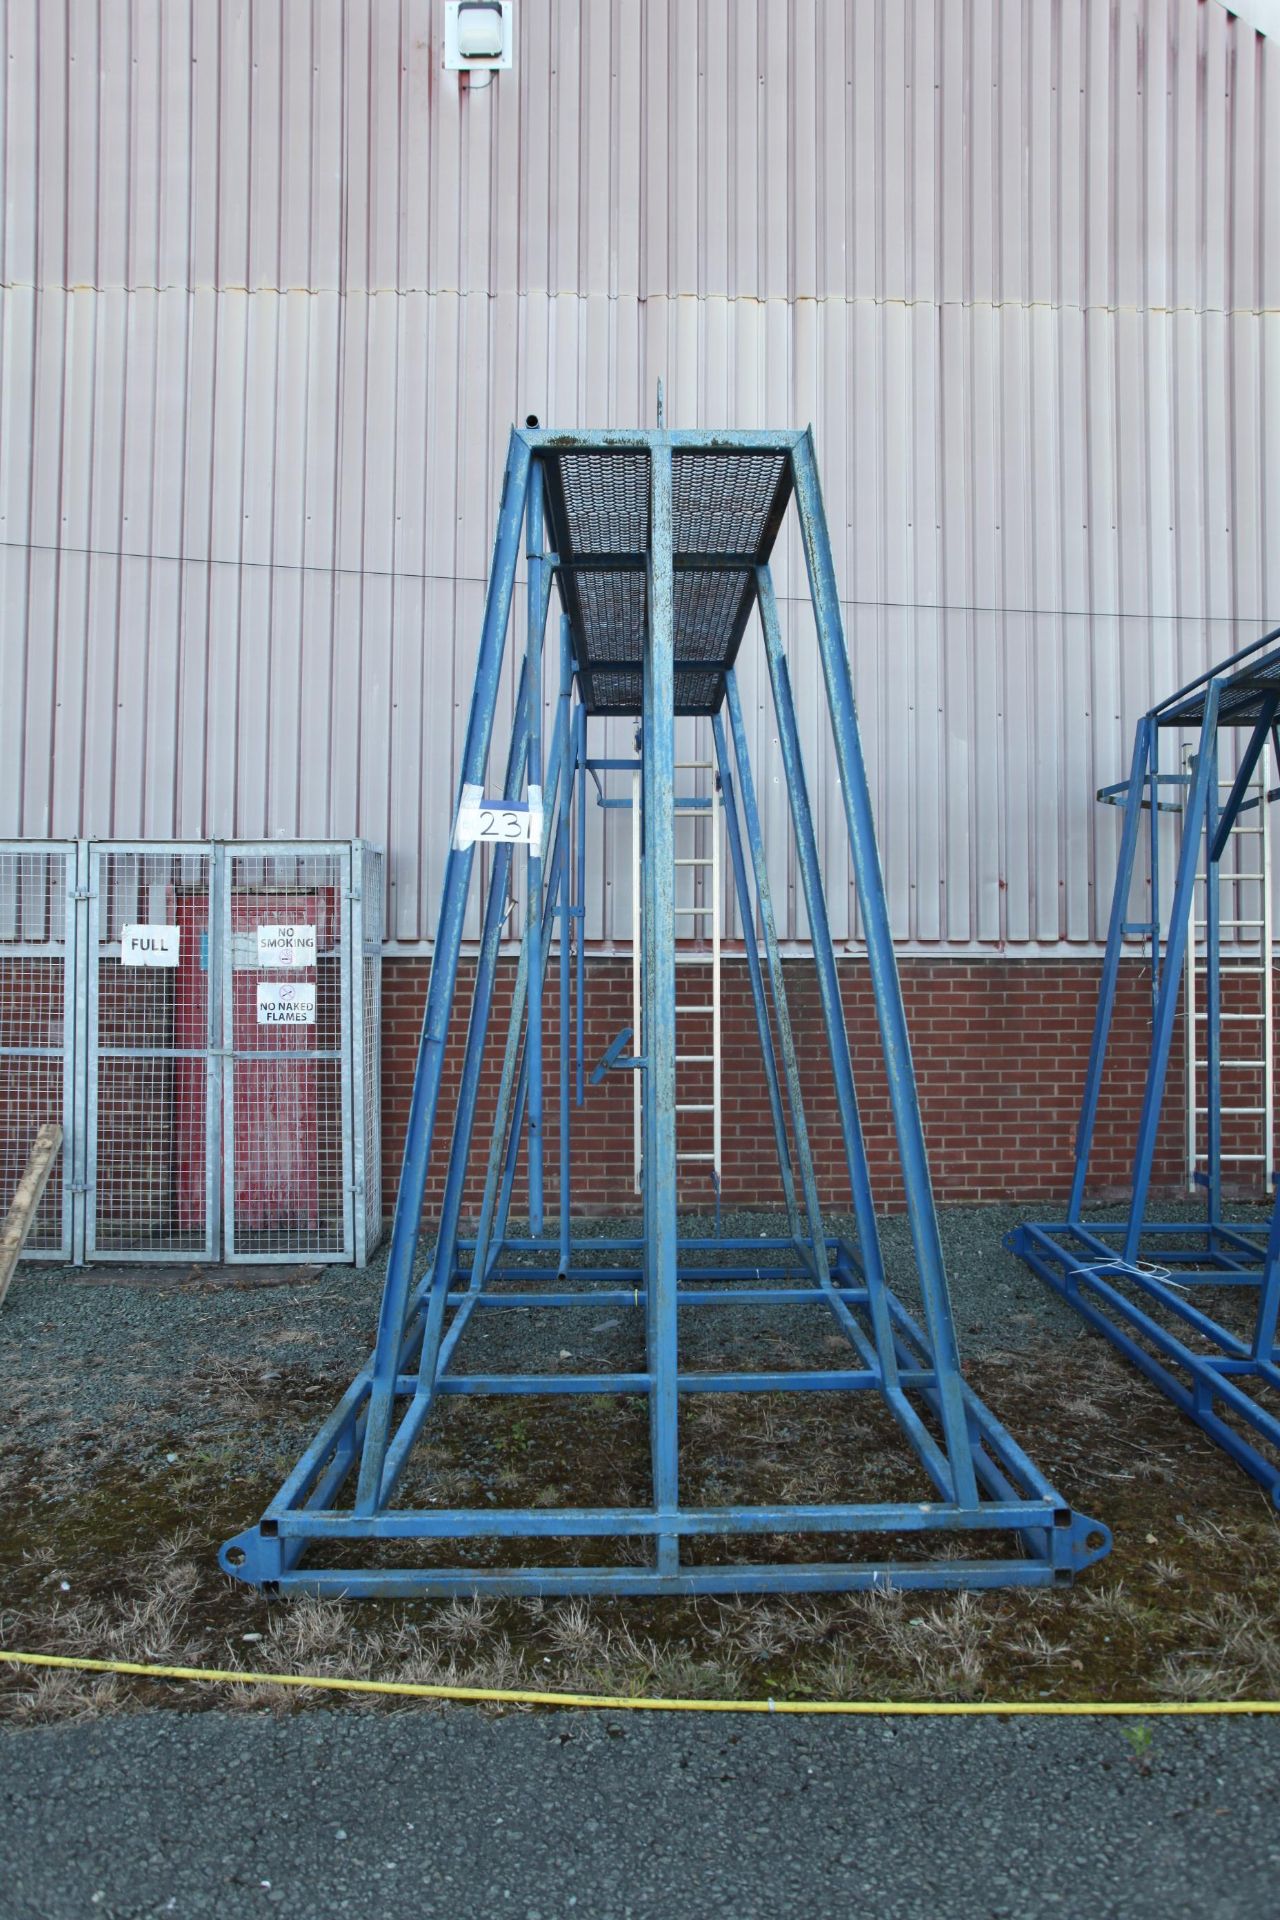 Apex lifting frame , free loading onto purchasers transport - yes, item located in Unicorn Road - Image 4 of 4